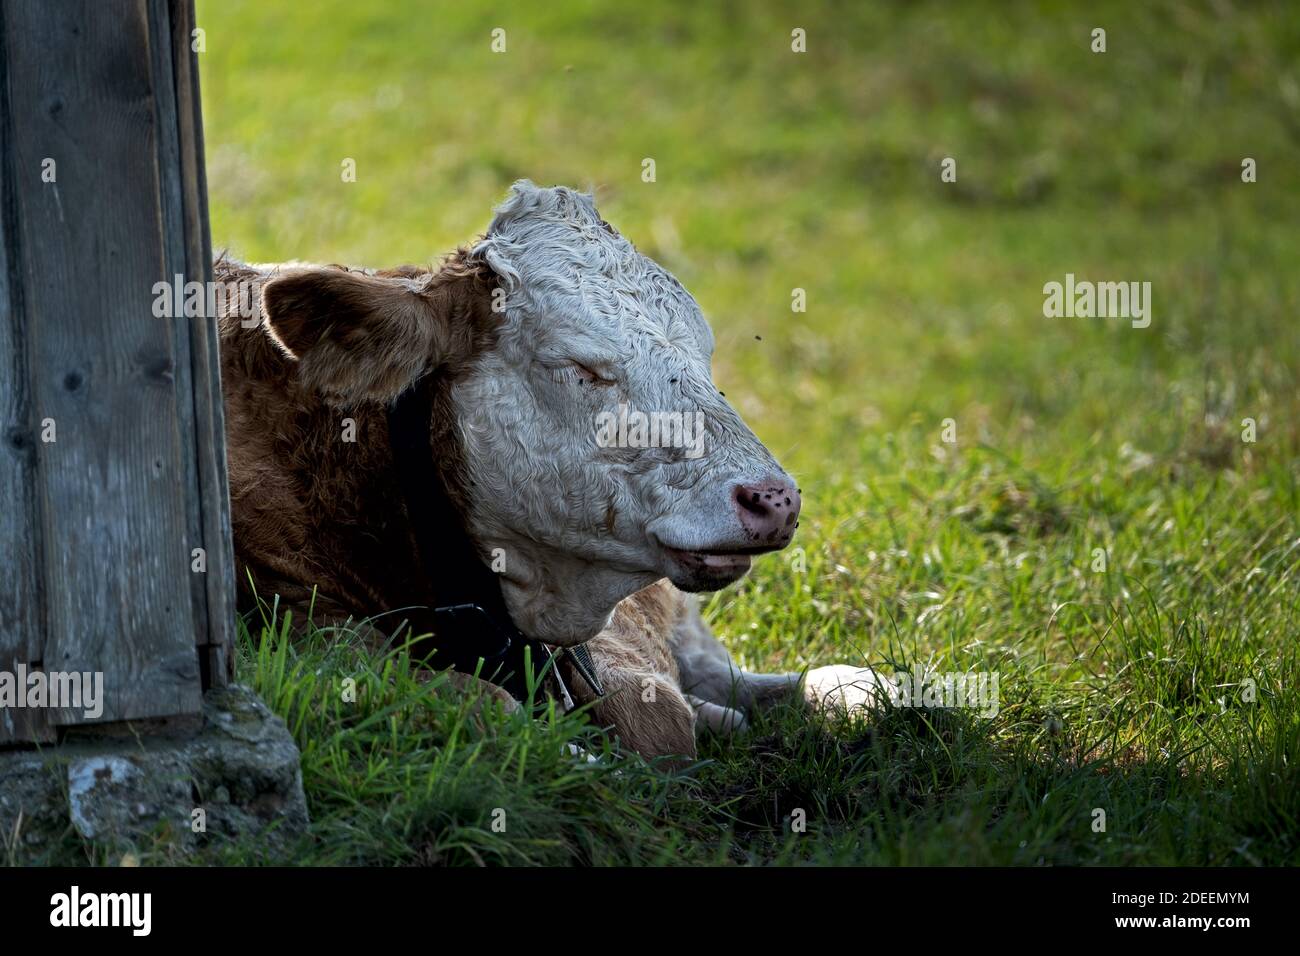 young cow is dozing in the grass, flies buzzing around its snout Stock Photo